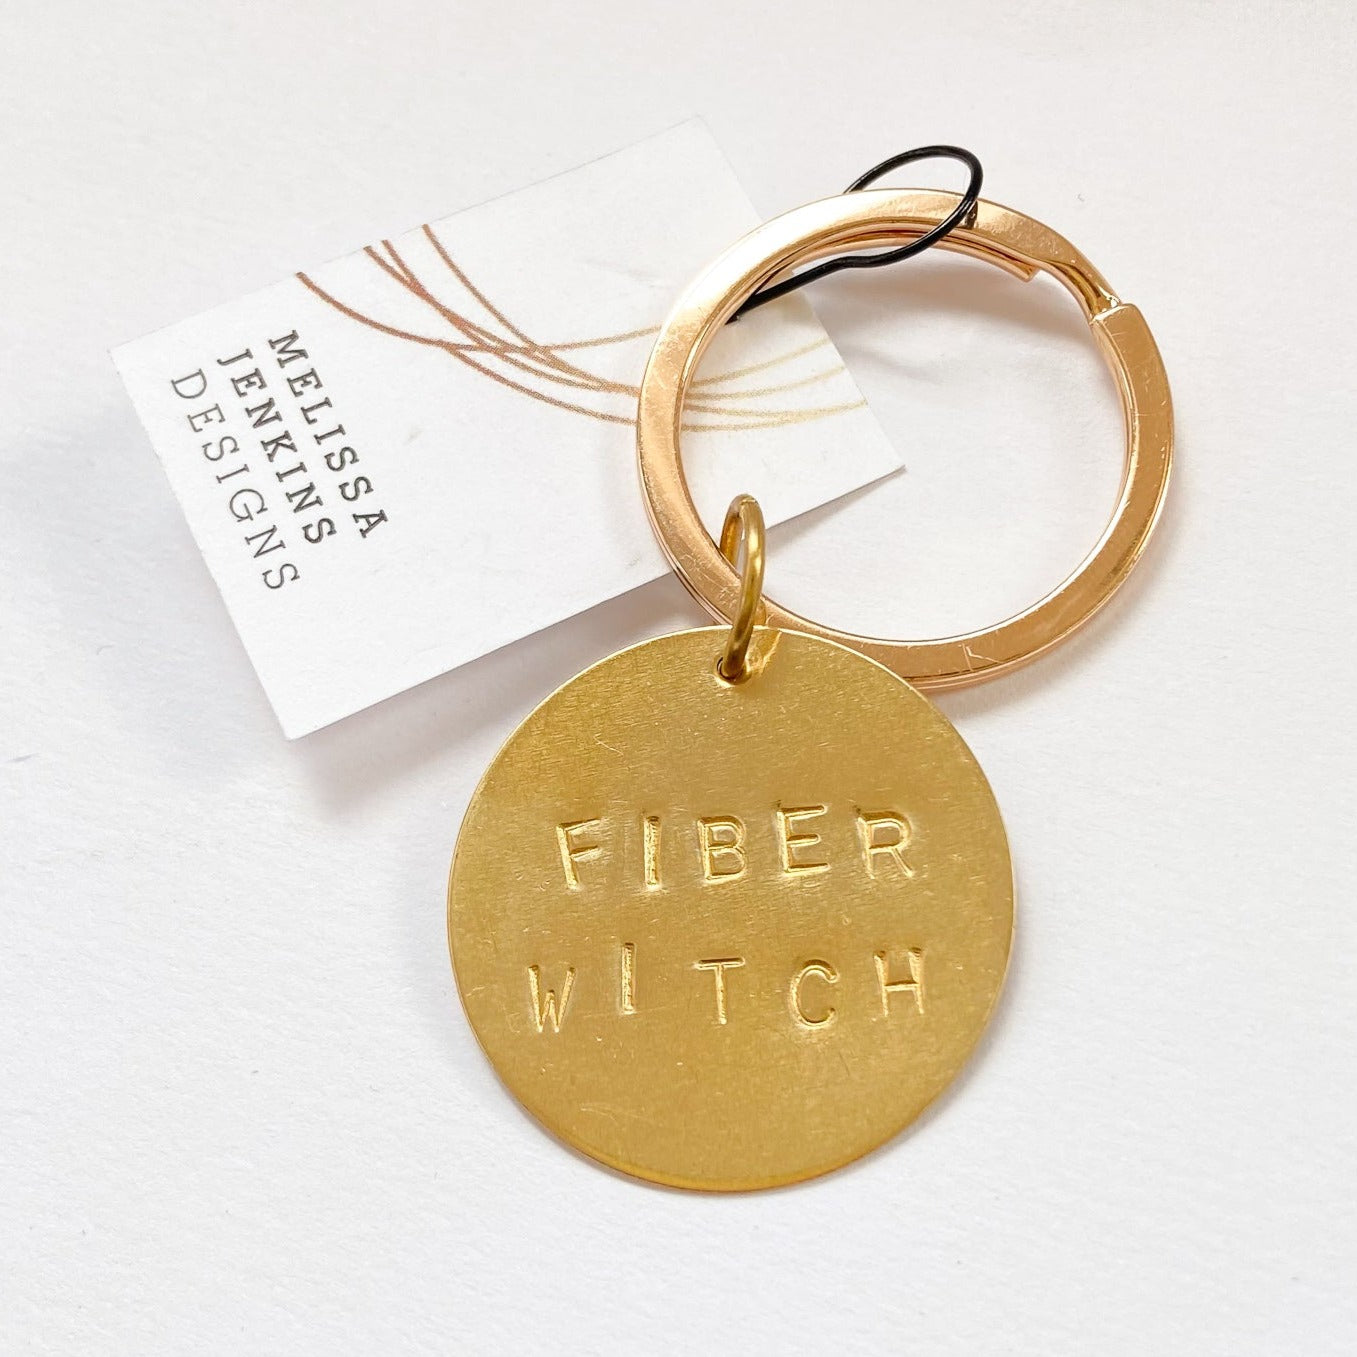 Knit Witch + Fiber Witch Hand Stamped Key Rings